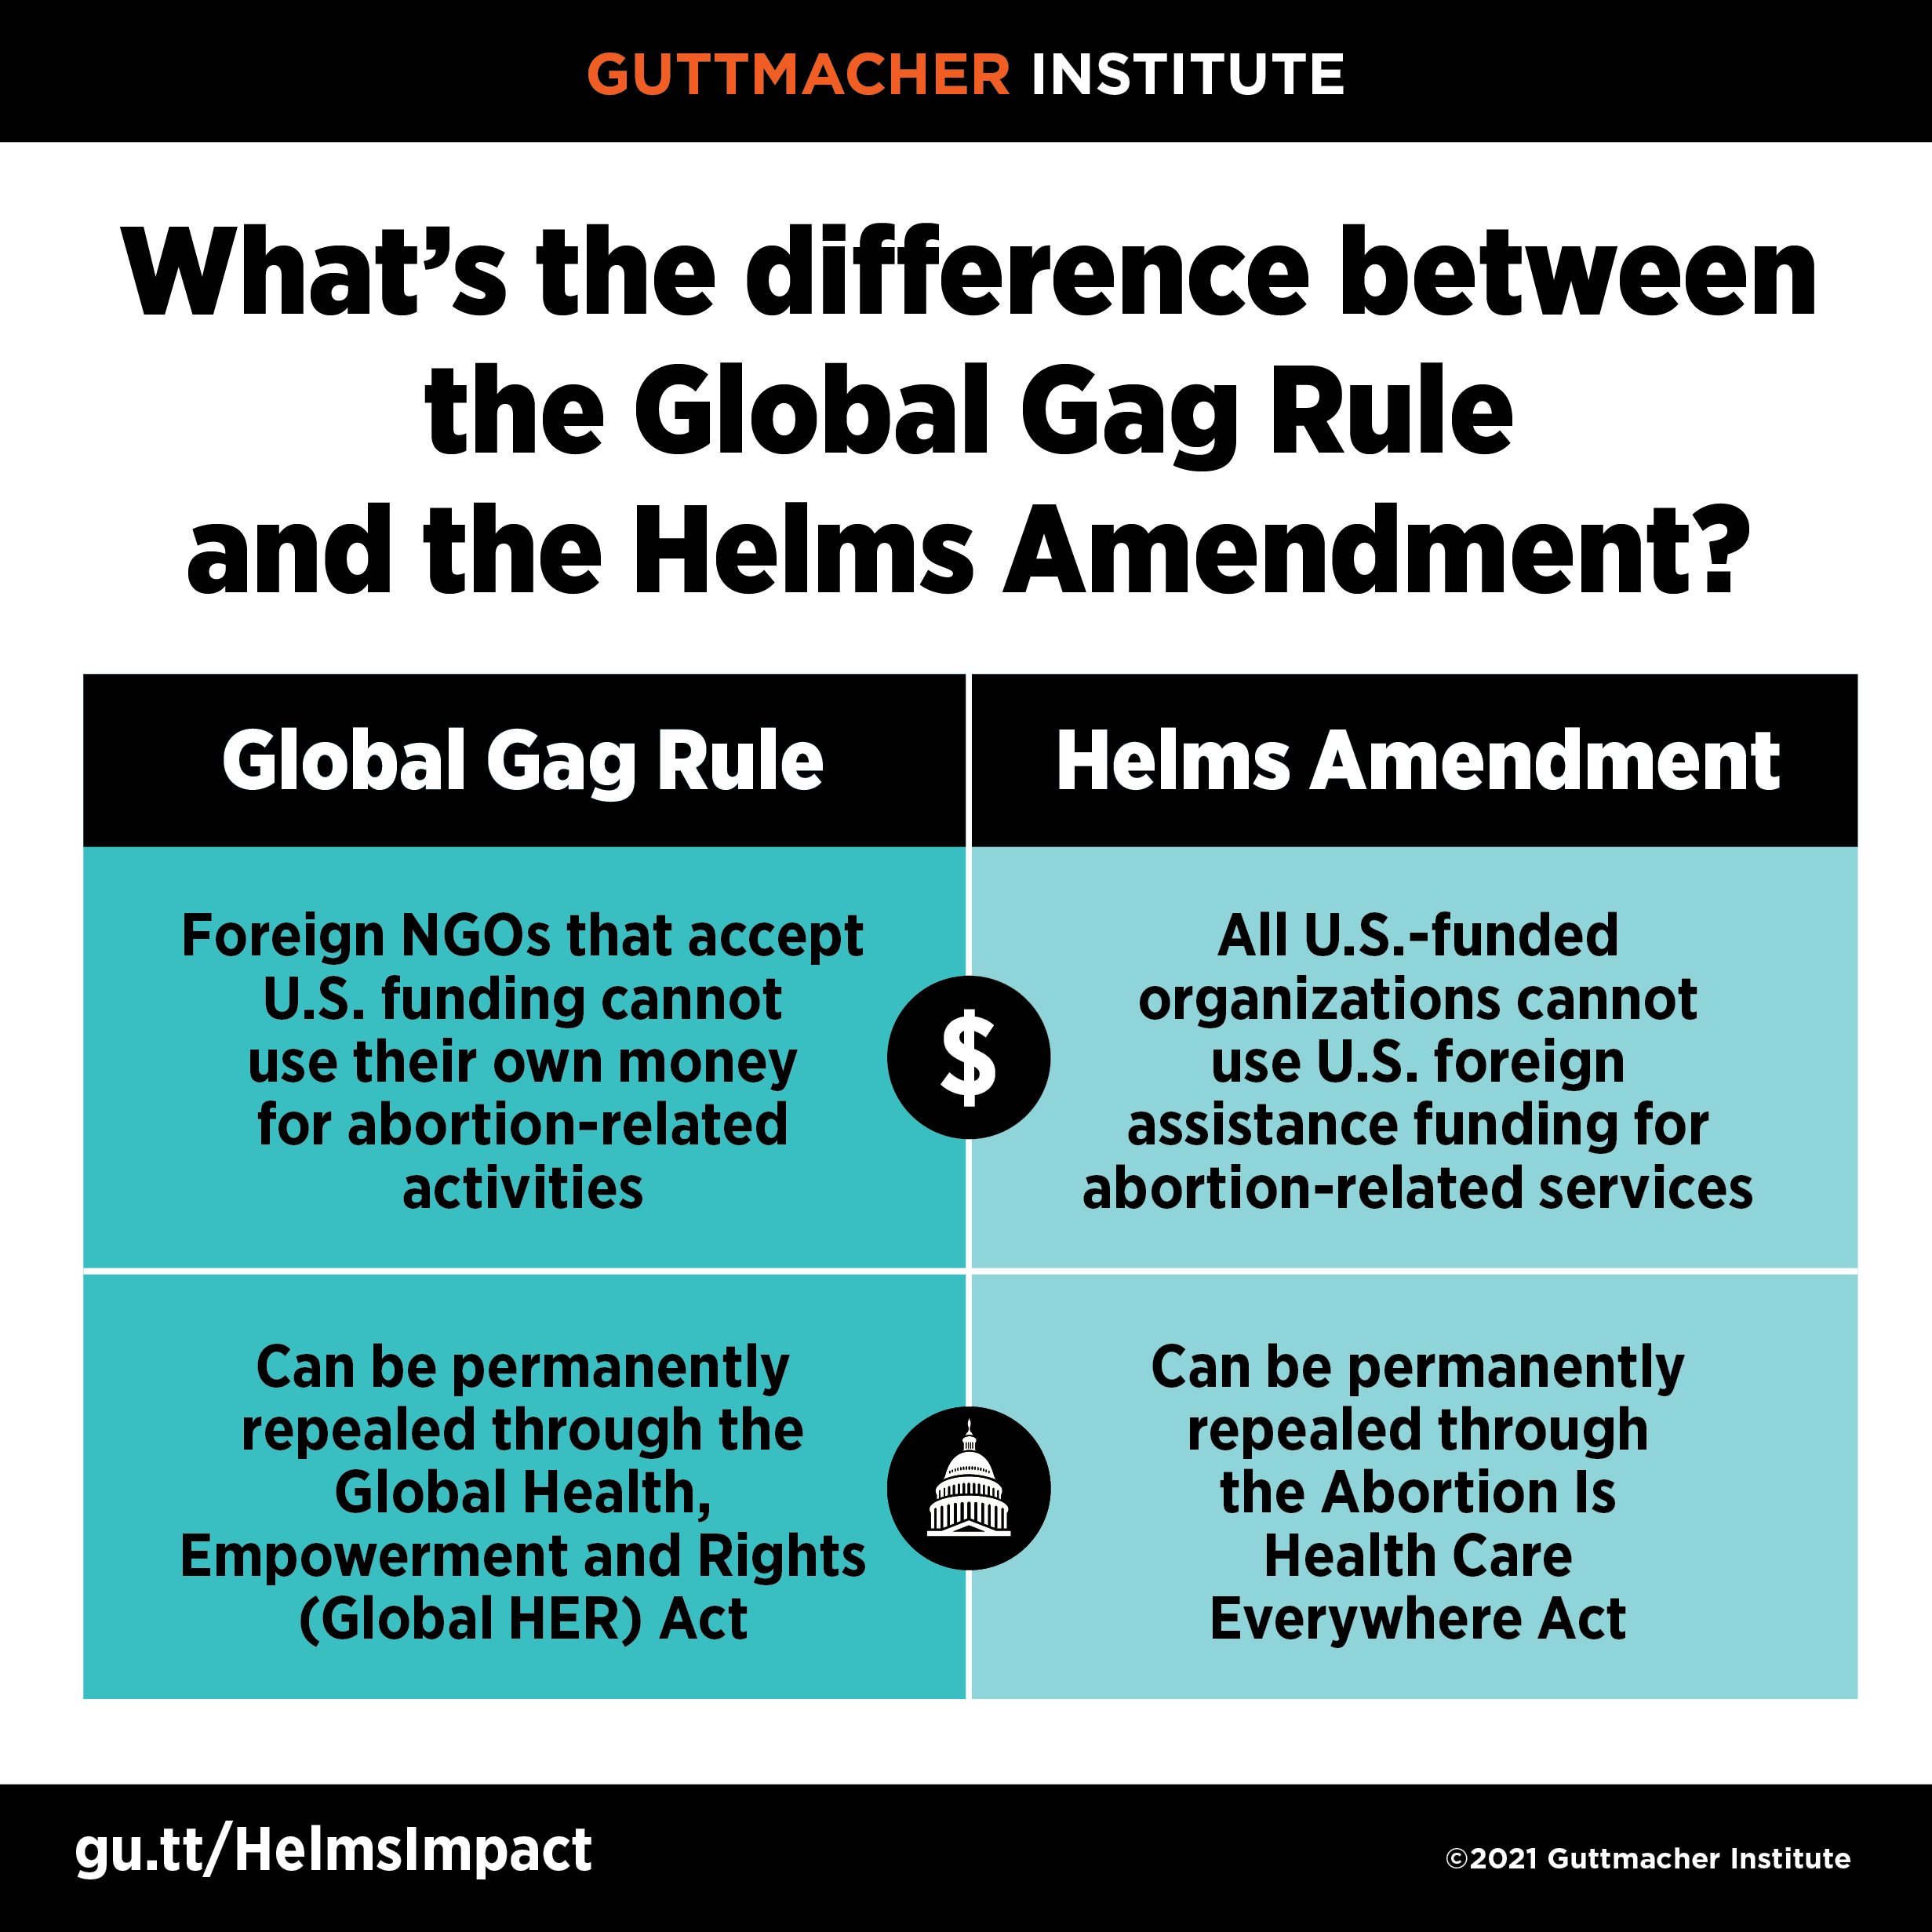 The Global Gag Rule restricts foreign NGOs that accept U.S. funding from using their own money for abortion-related activities and the Helms Amendment restricts U.S.-funded organizations from using U.S. foreign assistance funding for abortion-related services